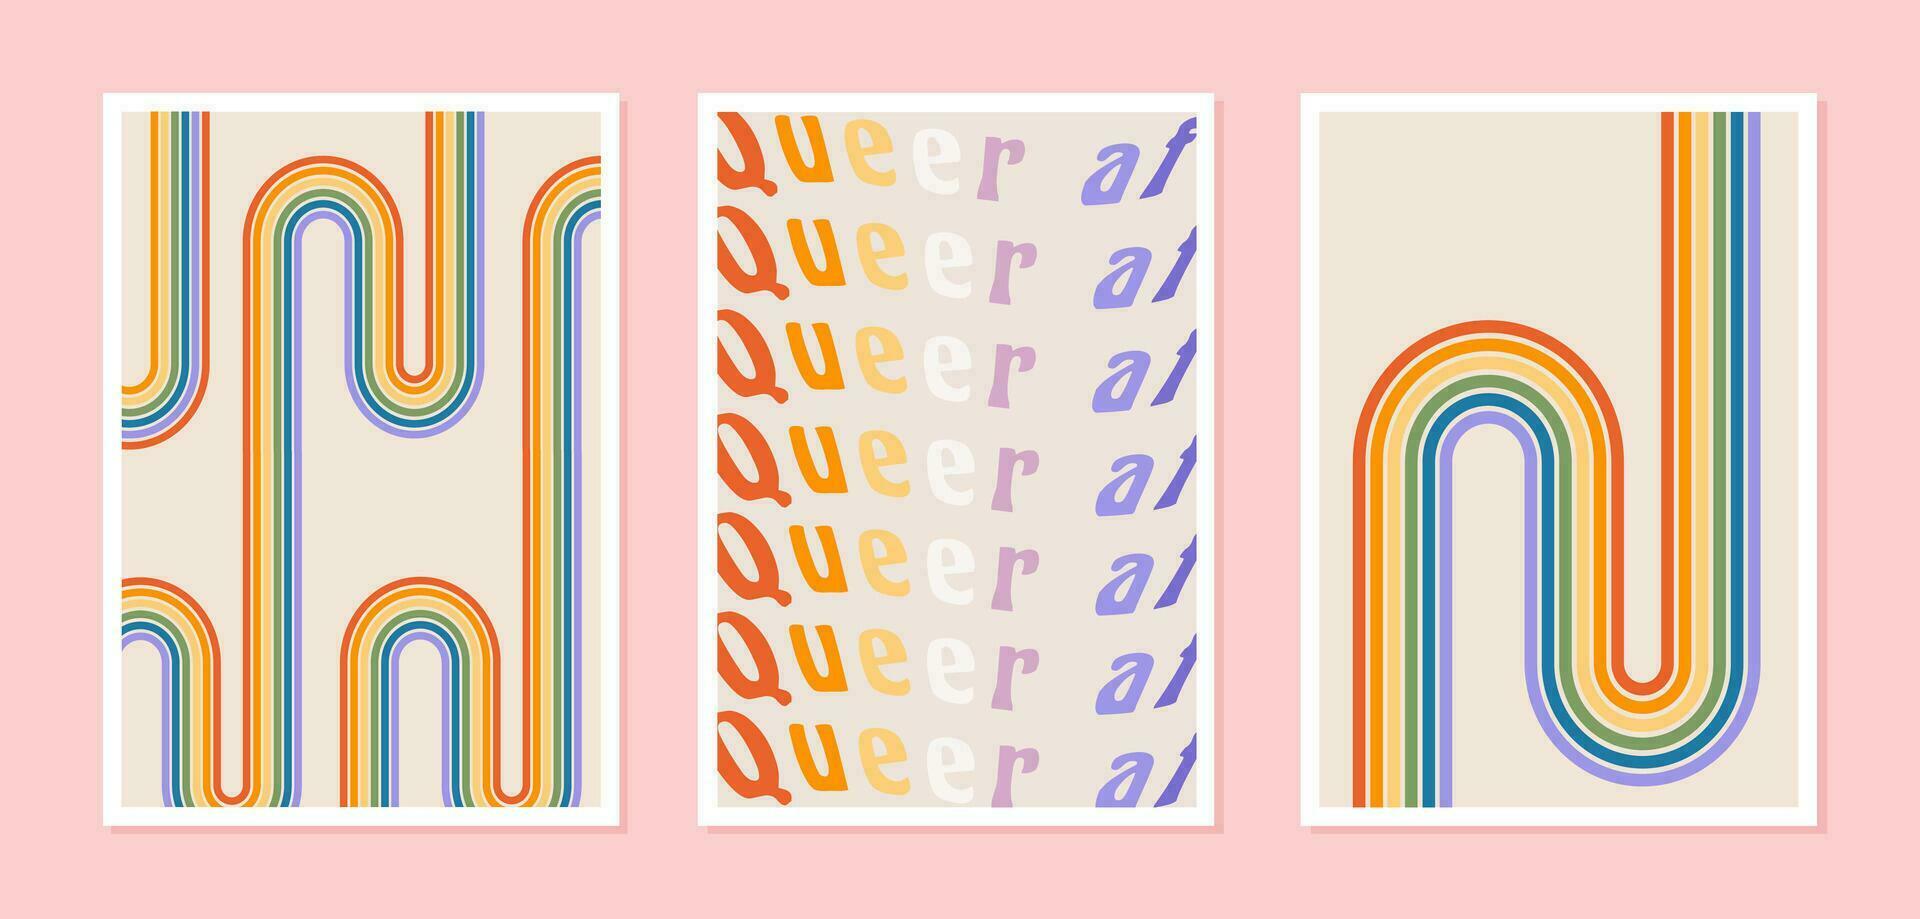 Pride month posters with rainbow and gay vibes phrase in retro groovy 60s 70s style. Set of queer vertical greeting cards with mid century rainbow. Greeting cards with positive rainbow colors. Vector. vector